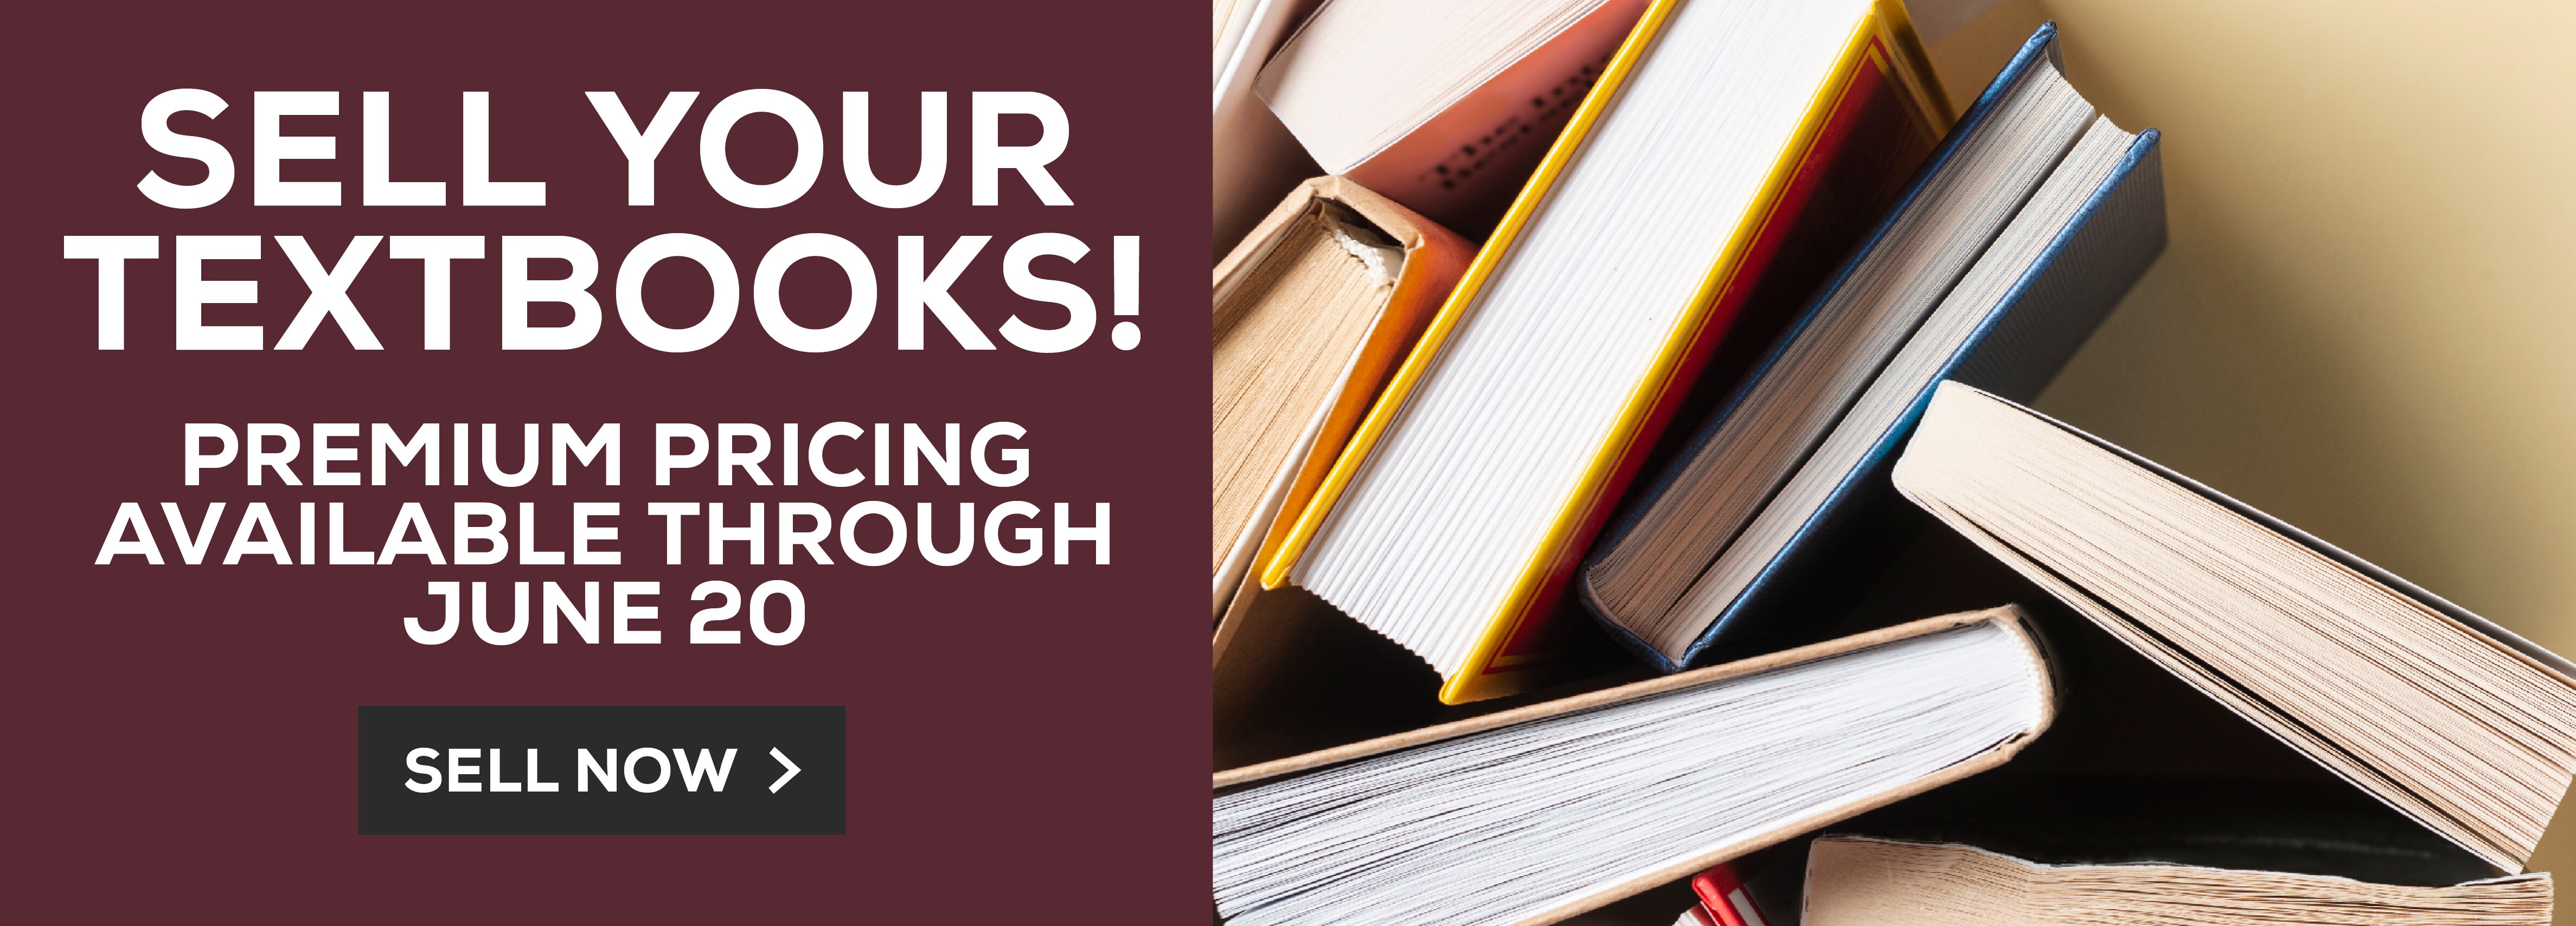 Sell Your Textbooks! Premium pricing available through June 20. Sell Now!					